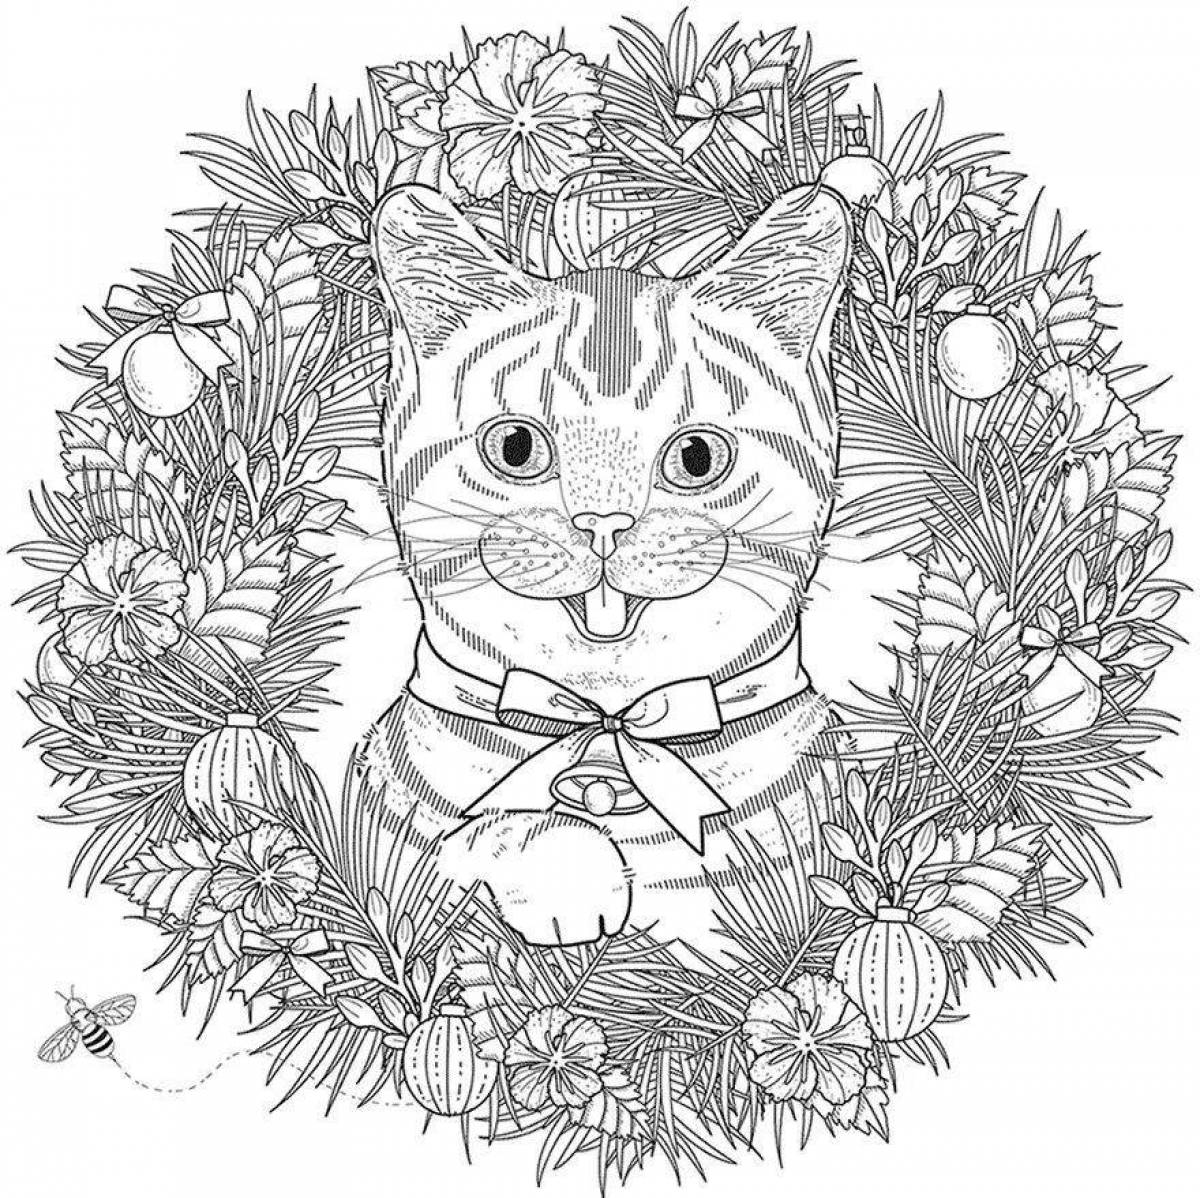 Royal coloring for girls 12 years old - cats